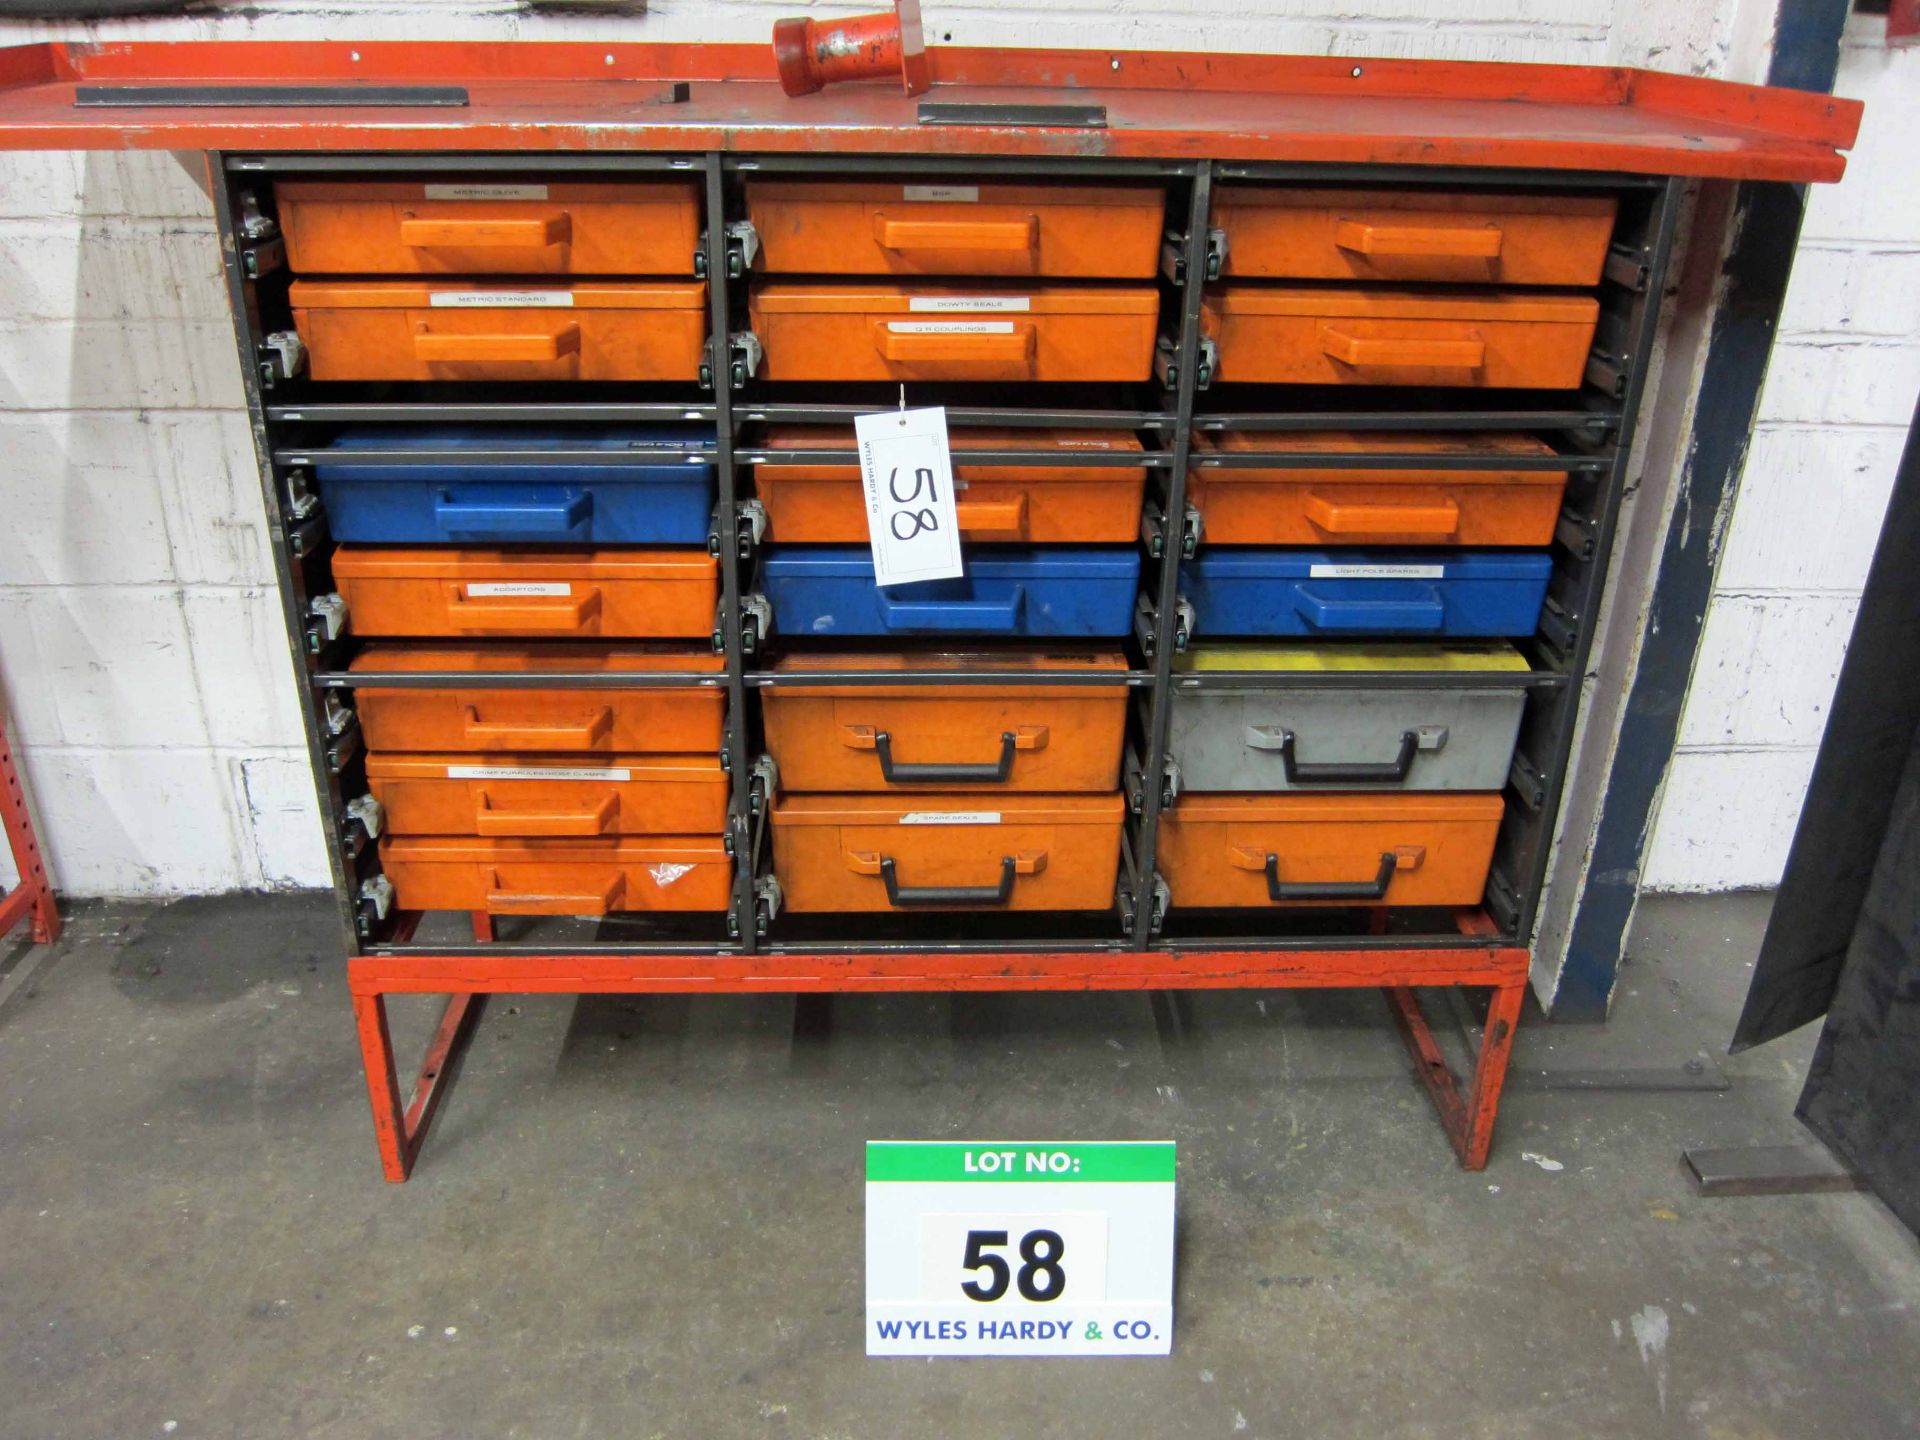 An Approx. 1700mm x 460mm x 1100mm Hydraulics Van Storage System comprising Nineteen ROLA CASE